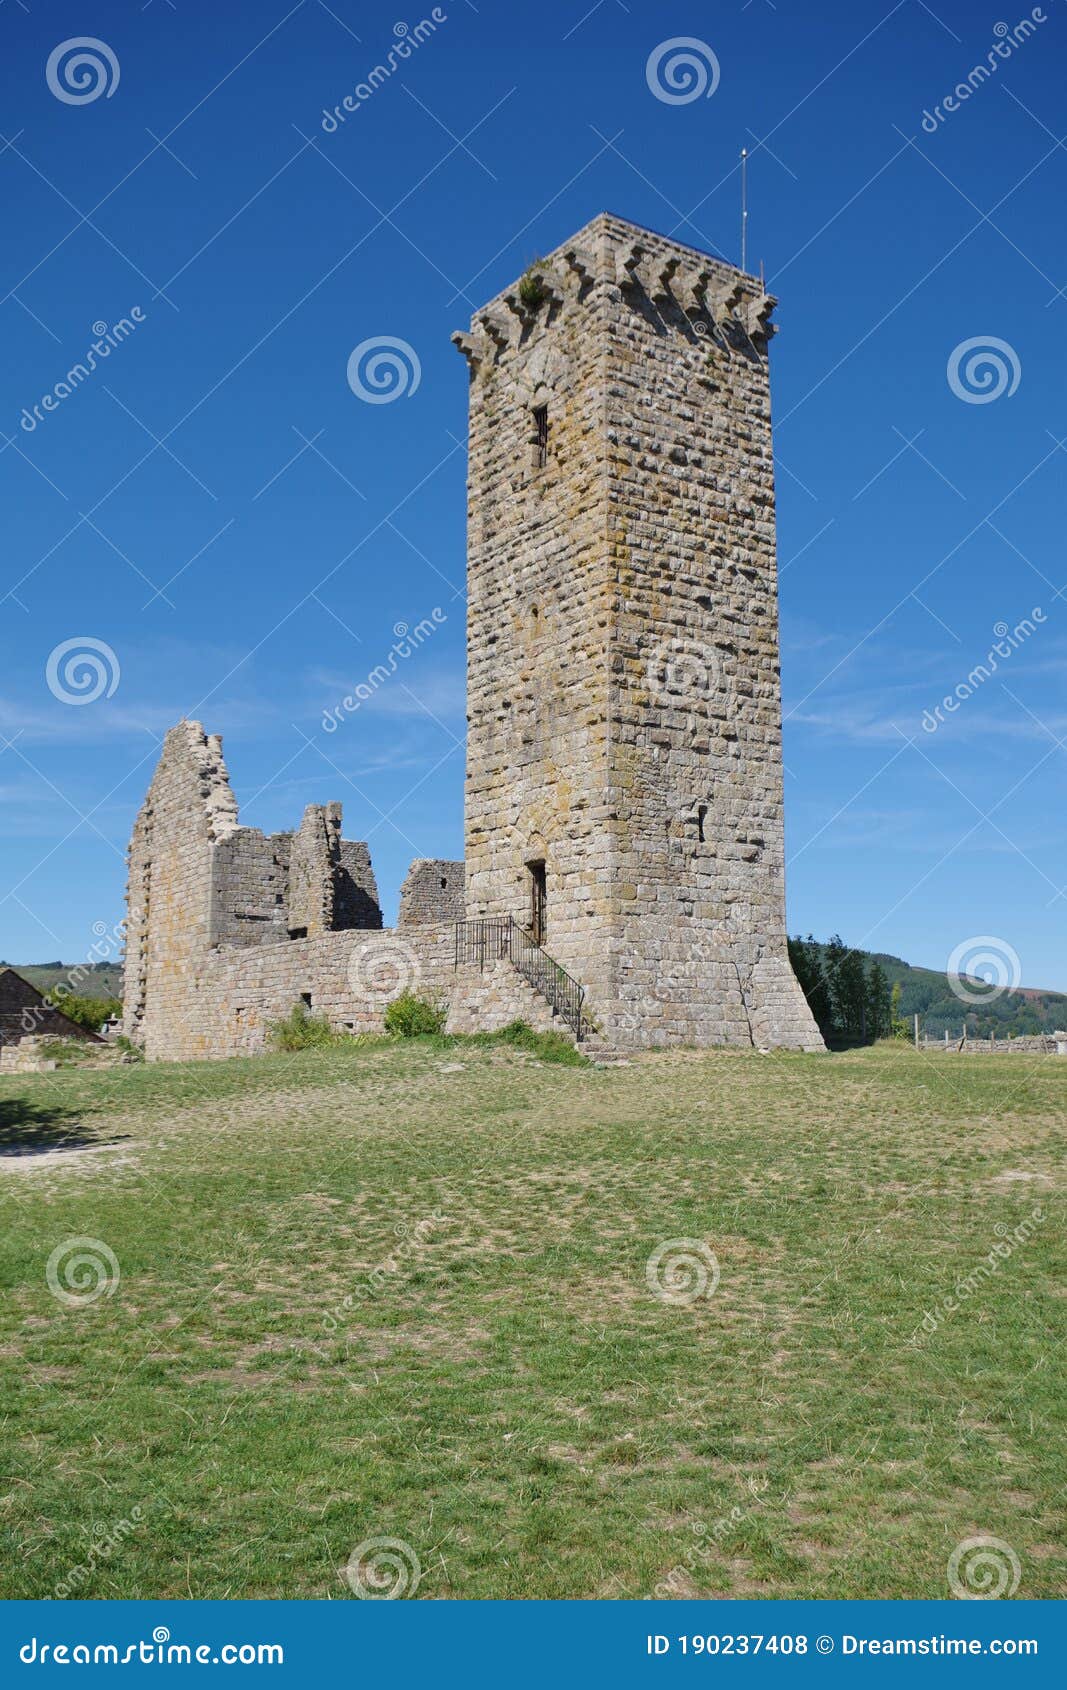 medieval tower in the cÃÂ©vÃÂ¨nnes garde de guÃÂ©rin france